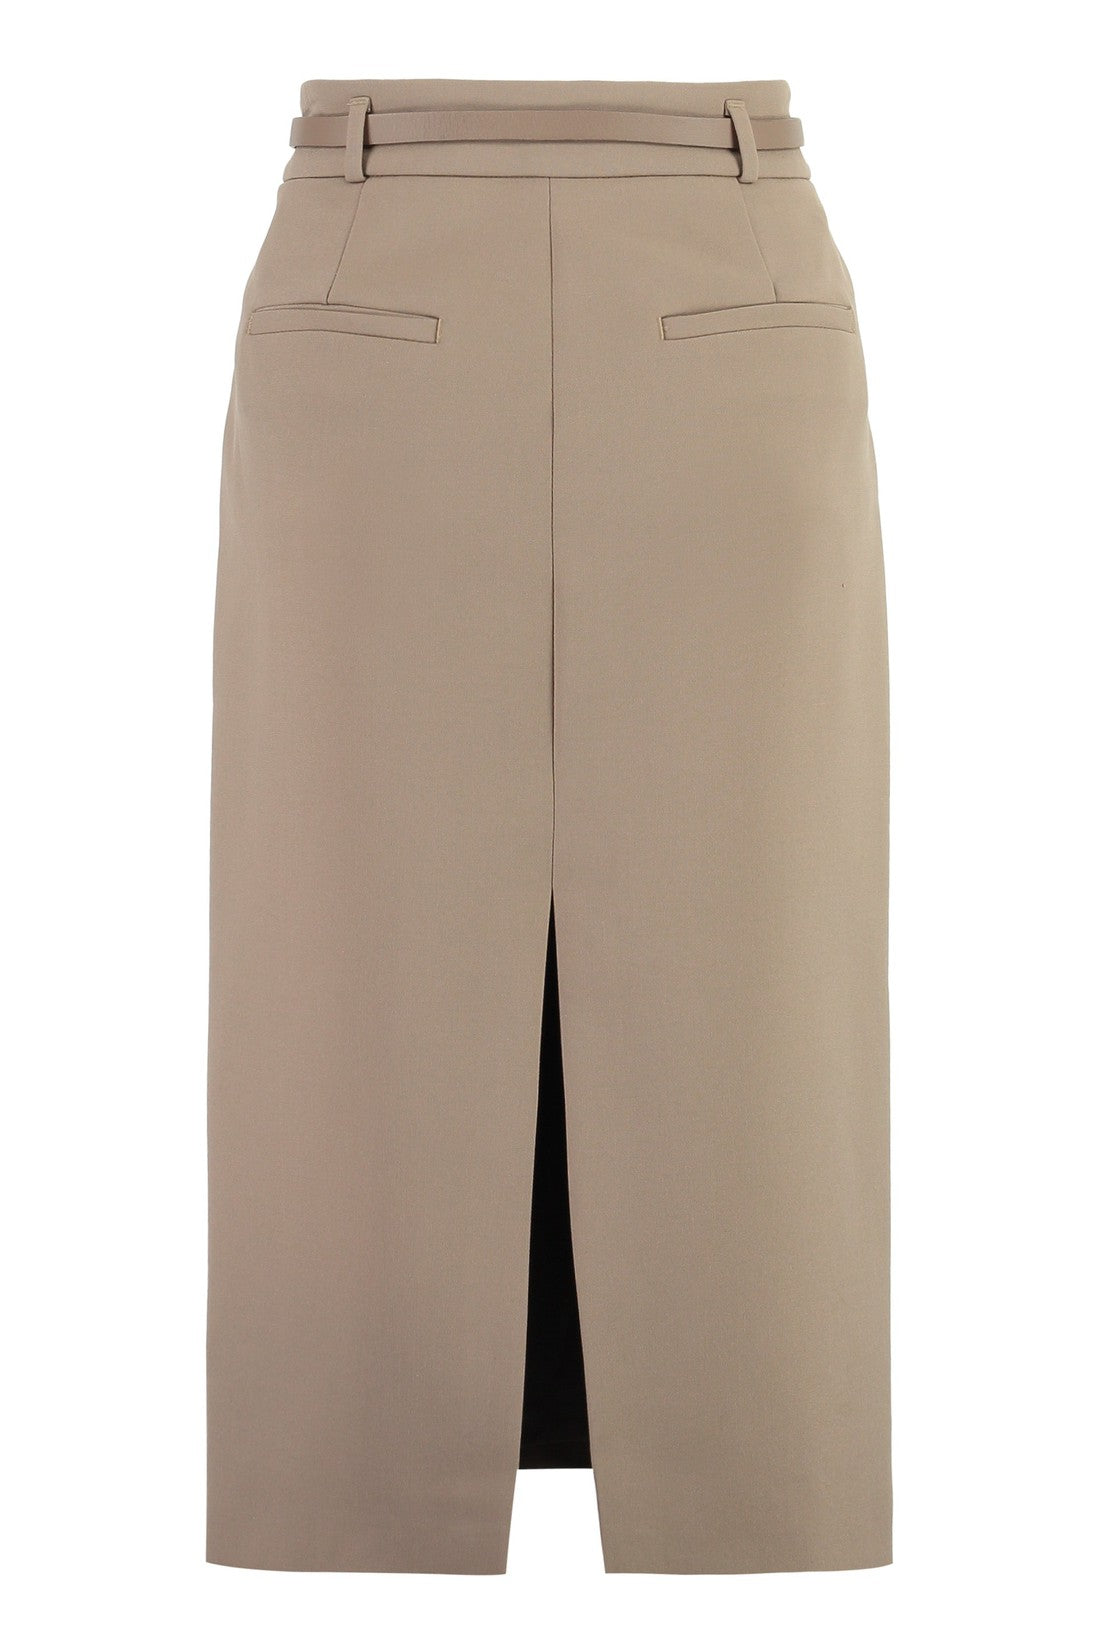 Peserico-OUTLET-SALE-Stretch pencil skirt-ARCHIVIST